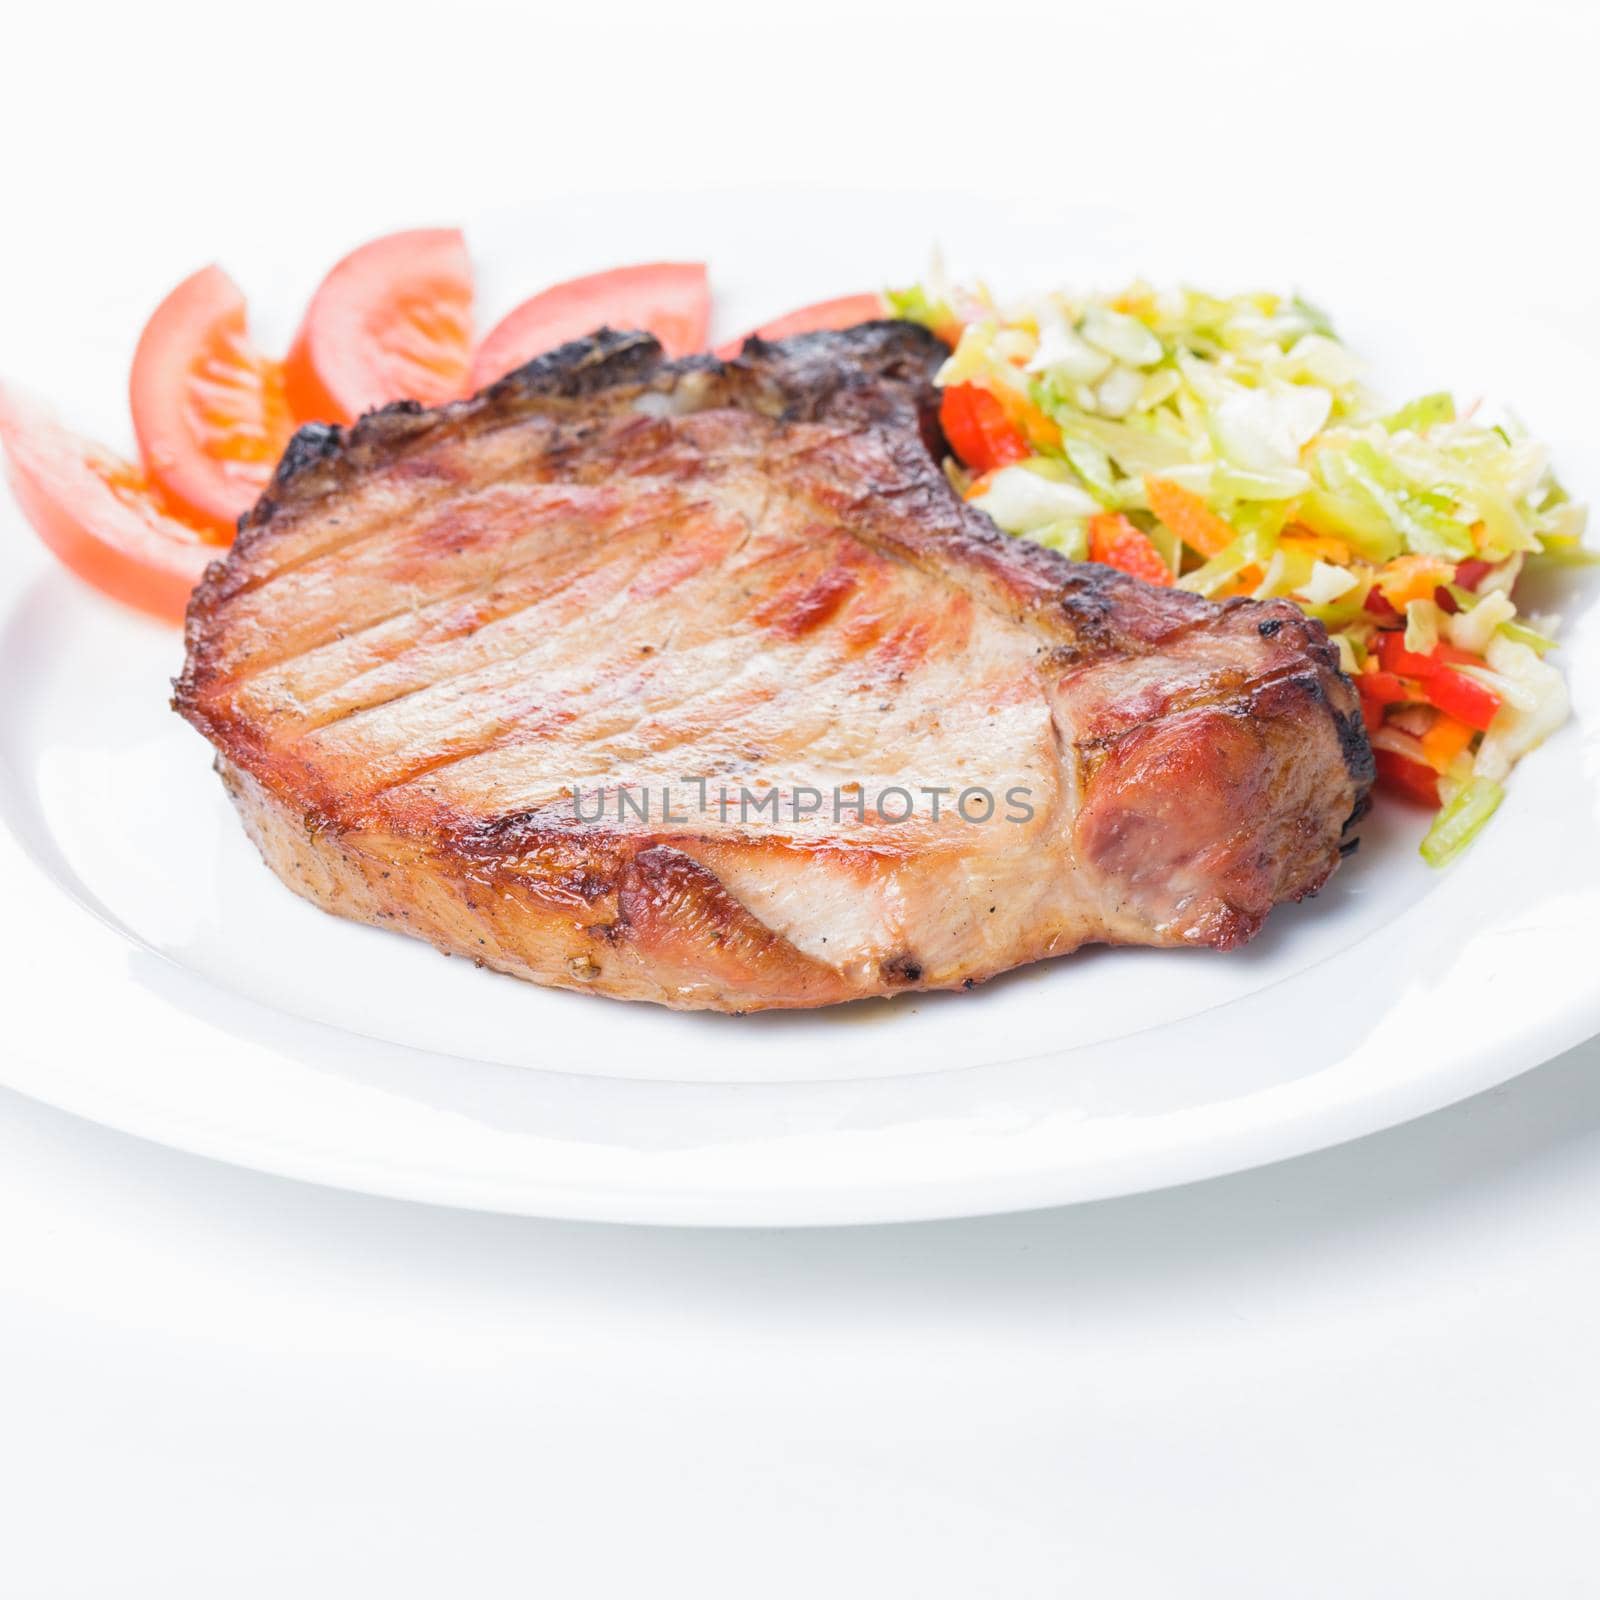 Grilled meat with spices on a white plate